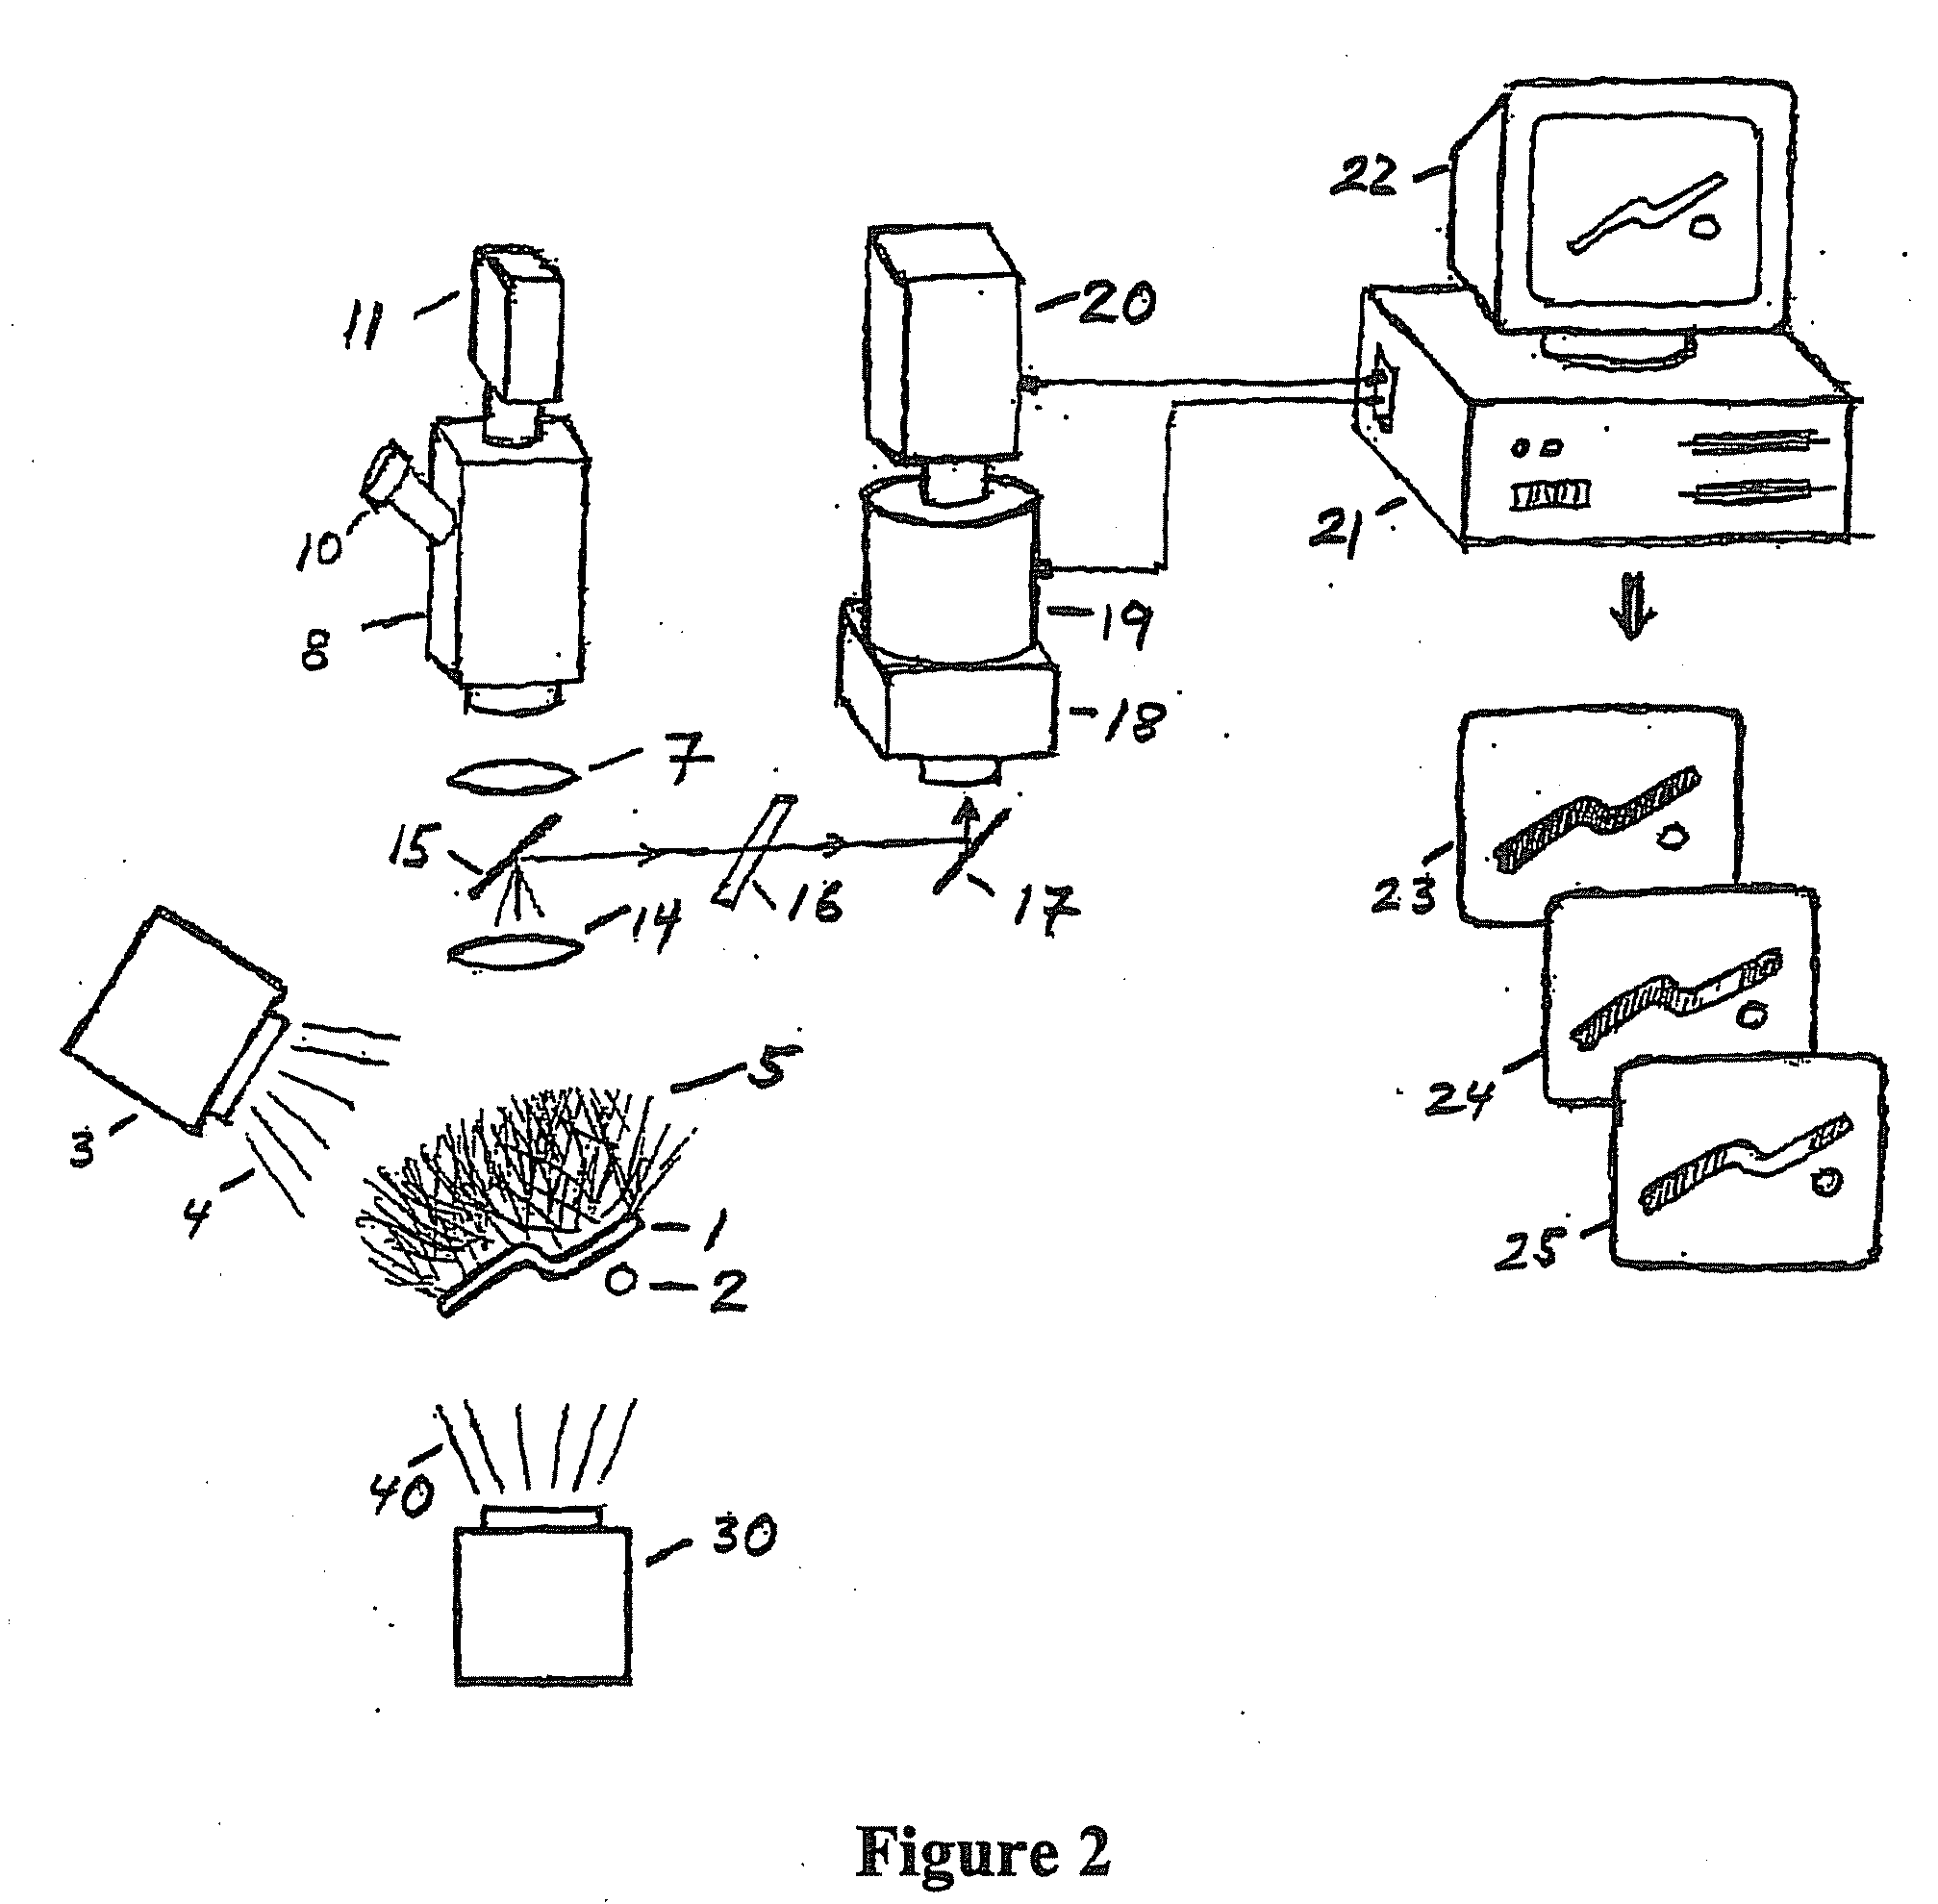 Method for improved forensic analysis